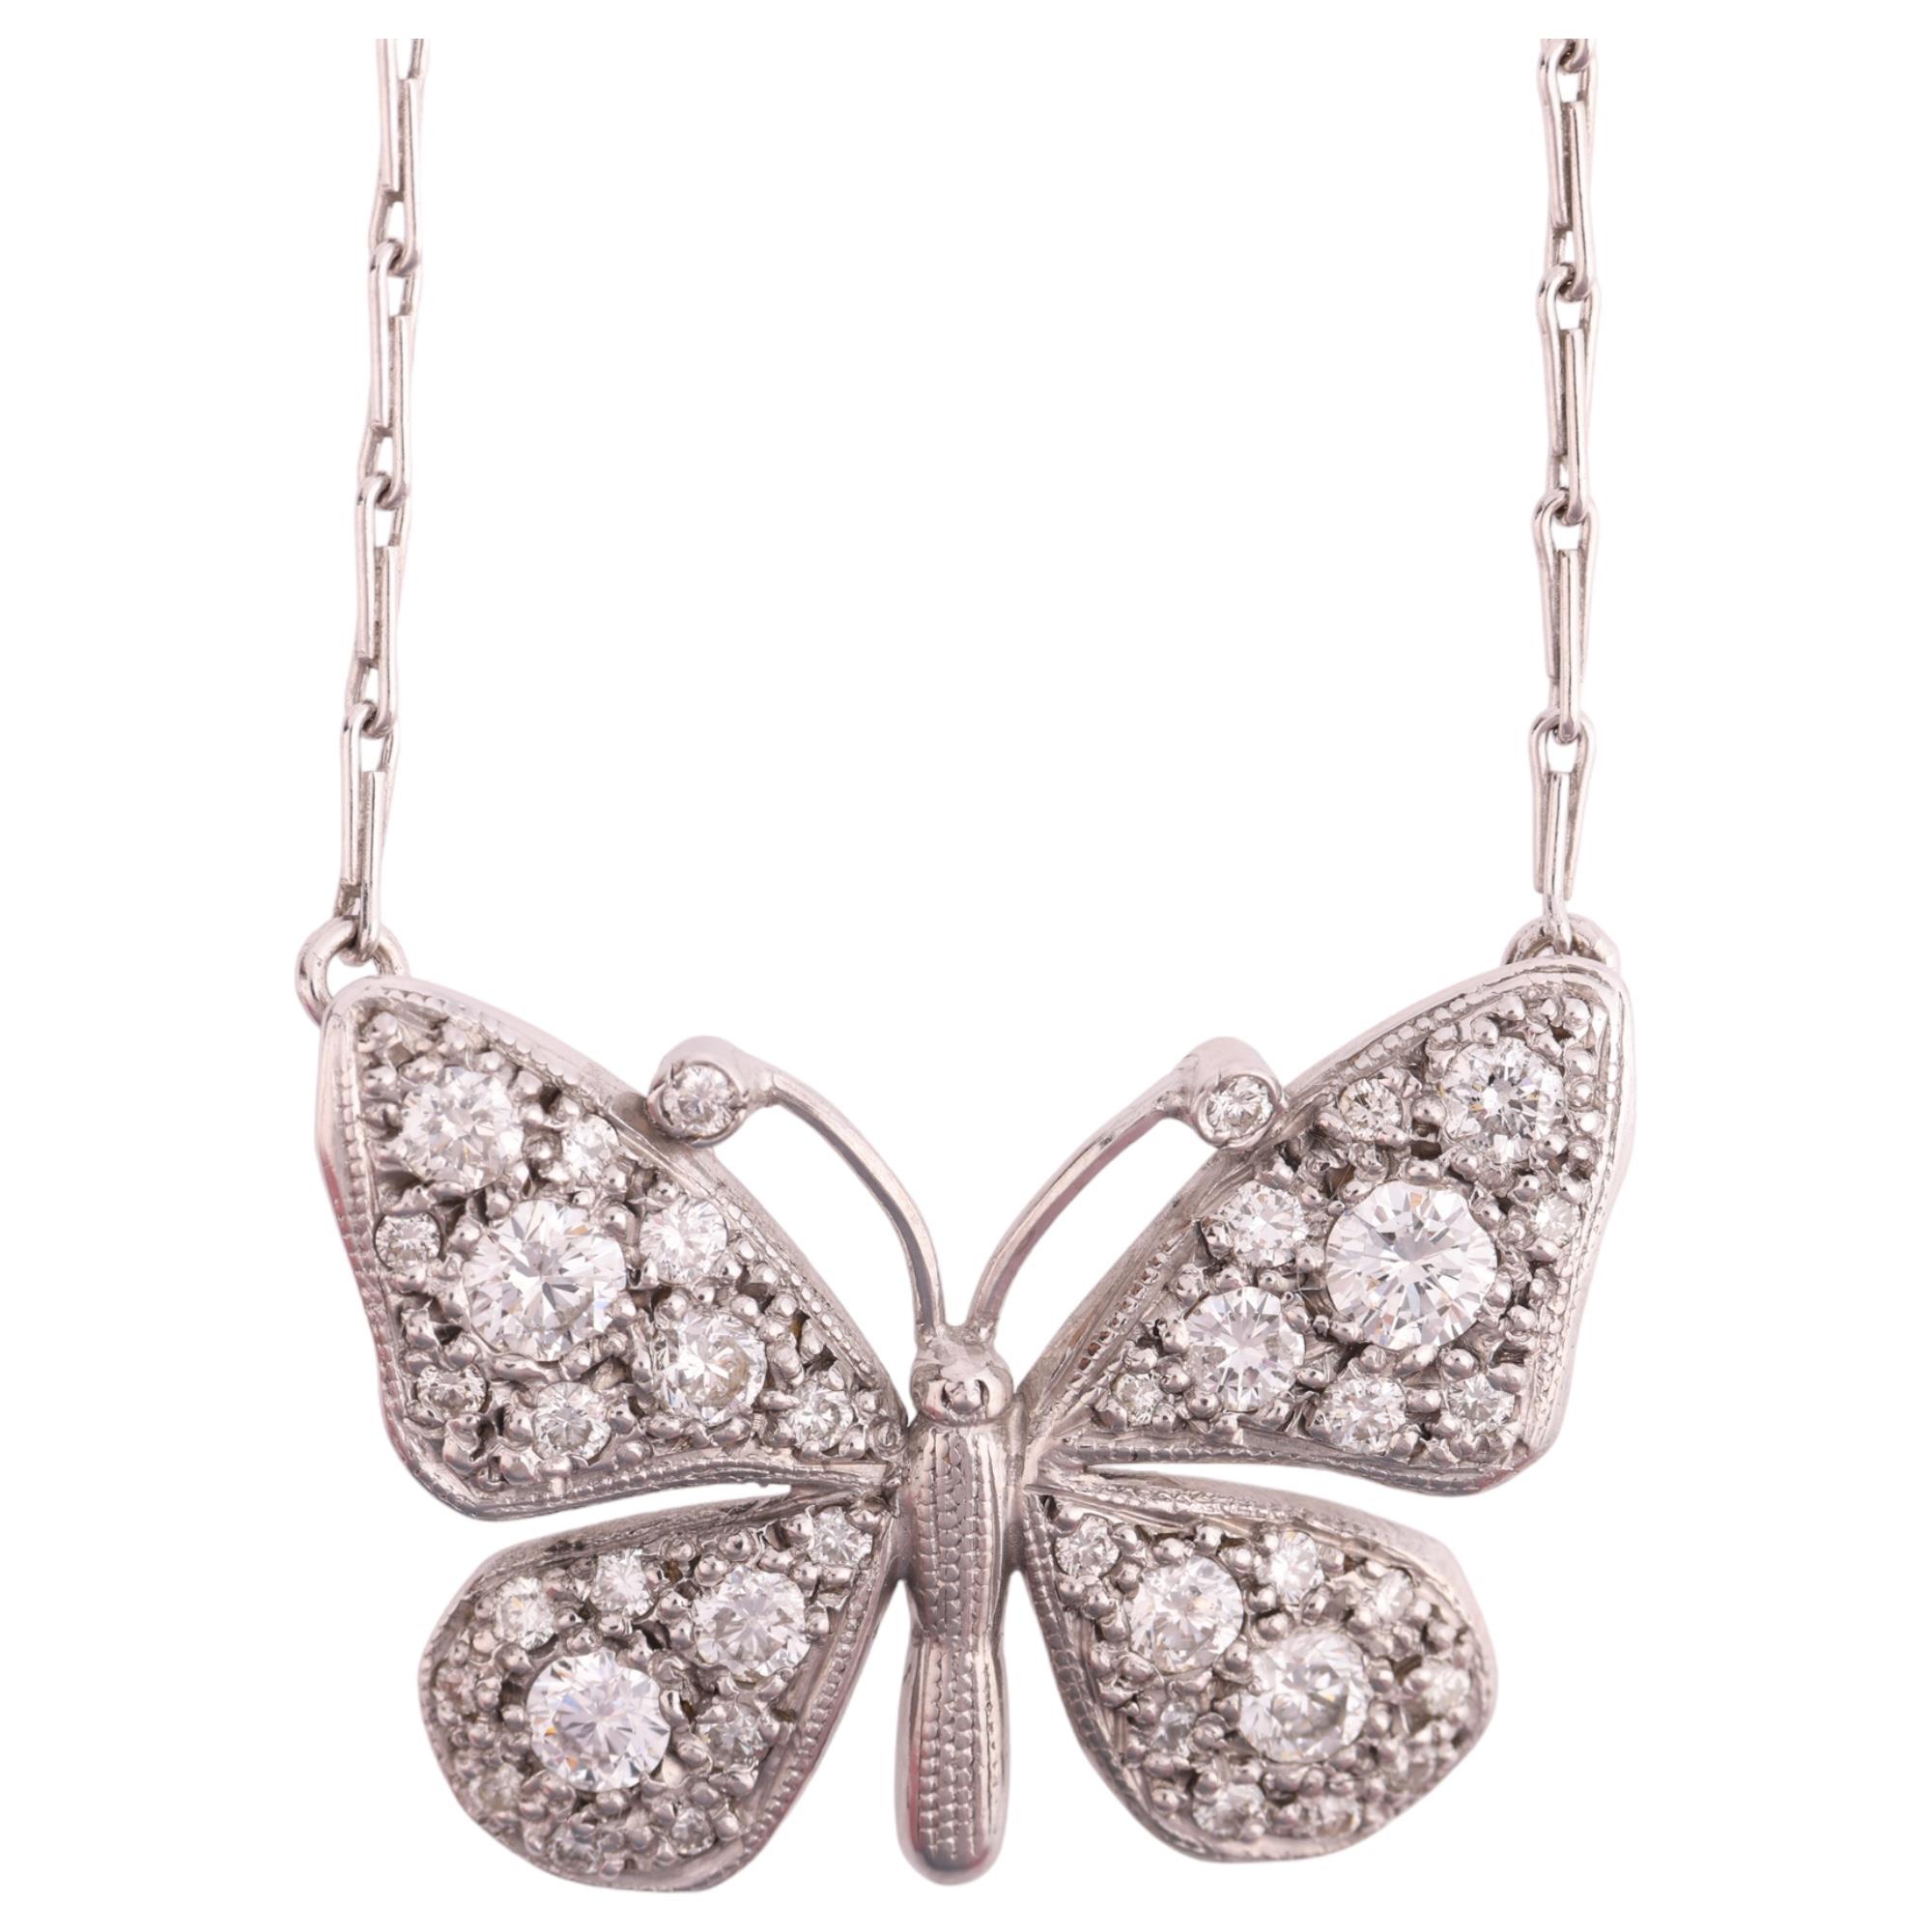 An 18ct white gold diamond butterfly pendant necklace, by Peter Farrow, pave set with modern round